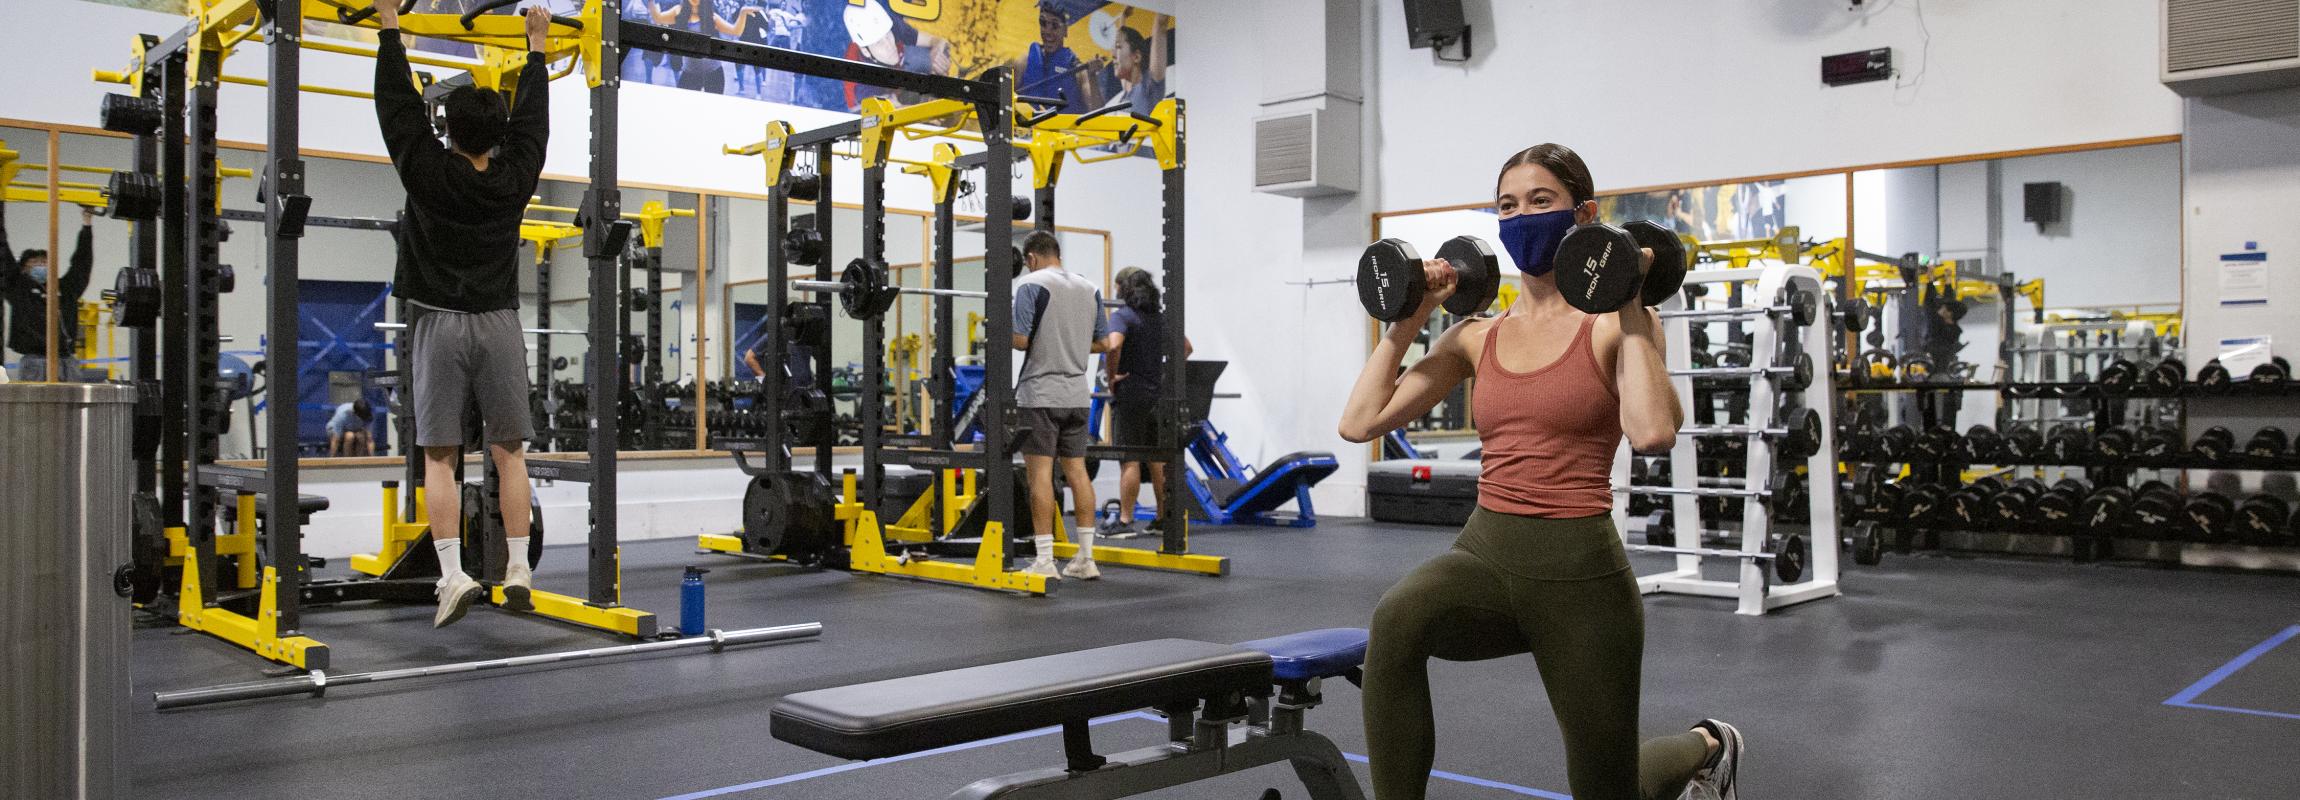 Photo of a student lifting weights in a gym